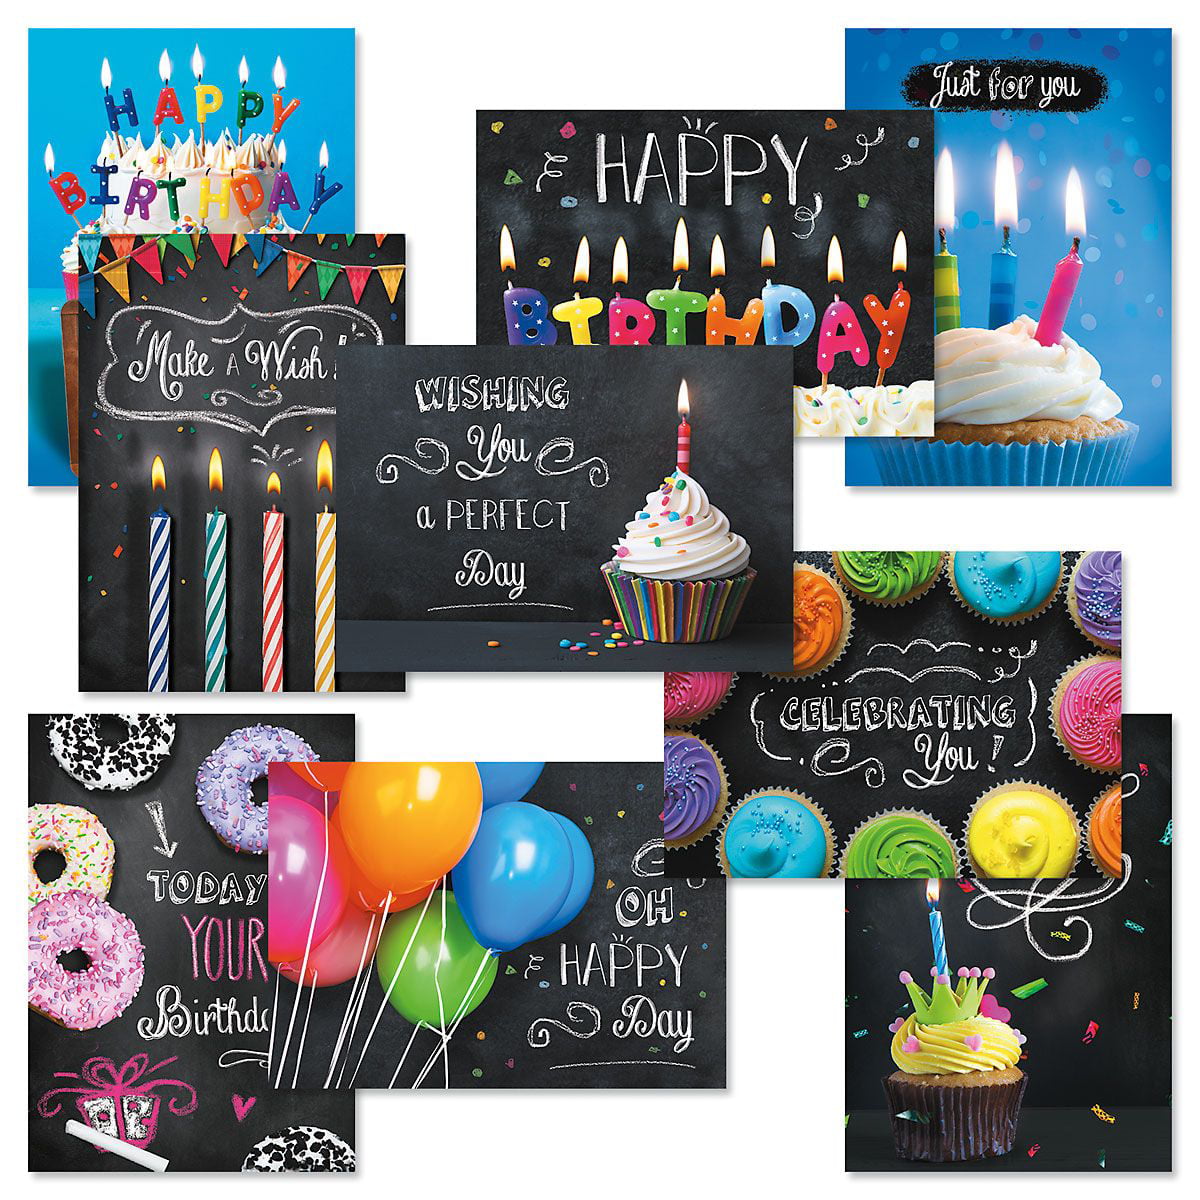 Happy Birthday Greeting Cards New with Envelopes by Design Design 